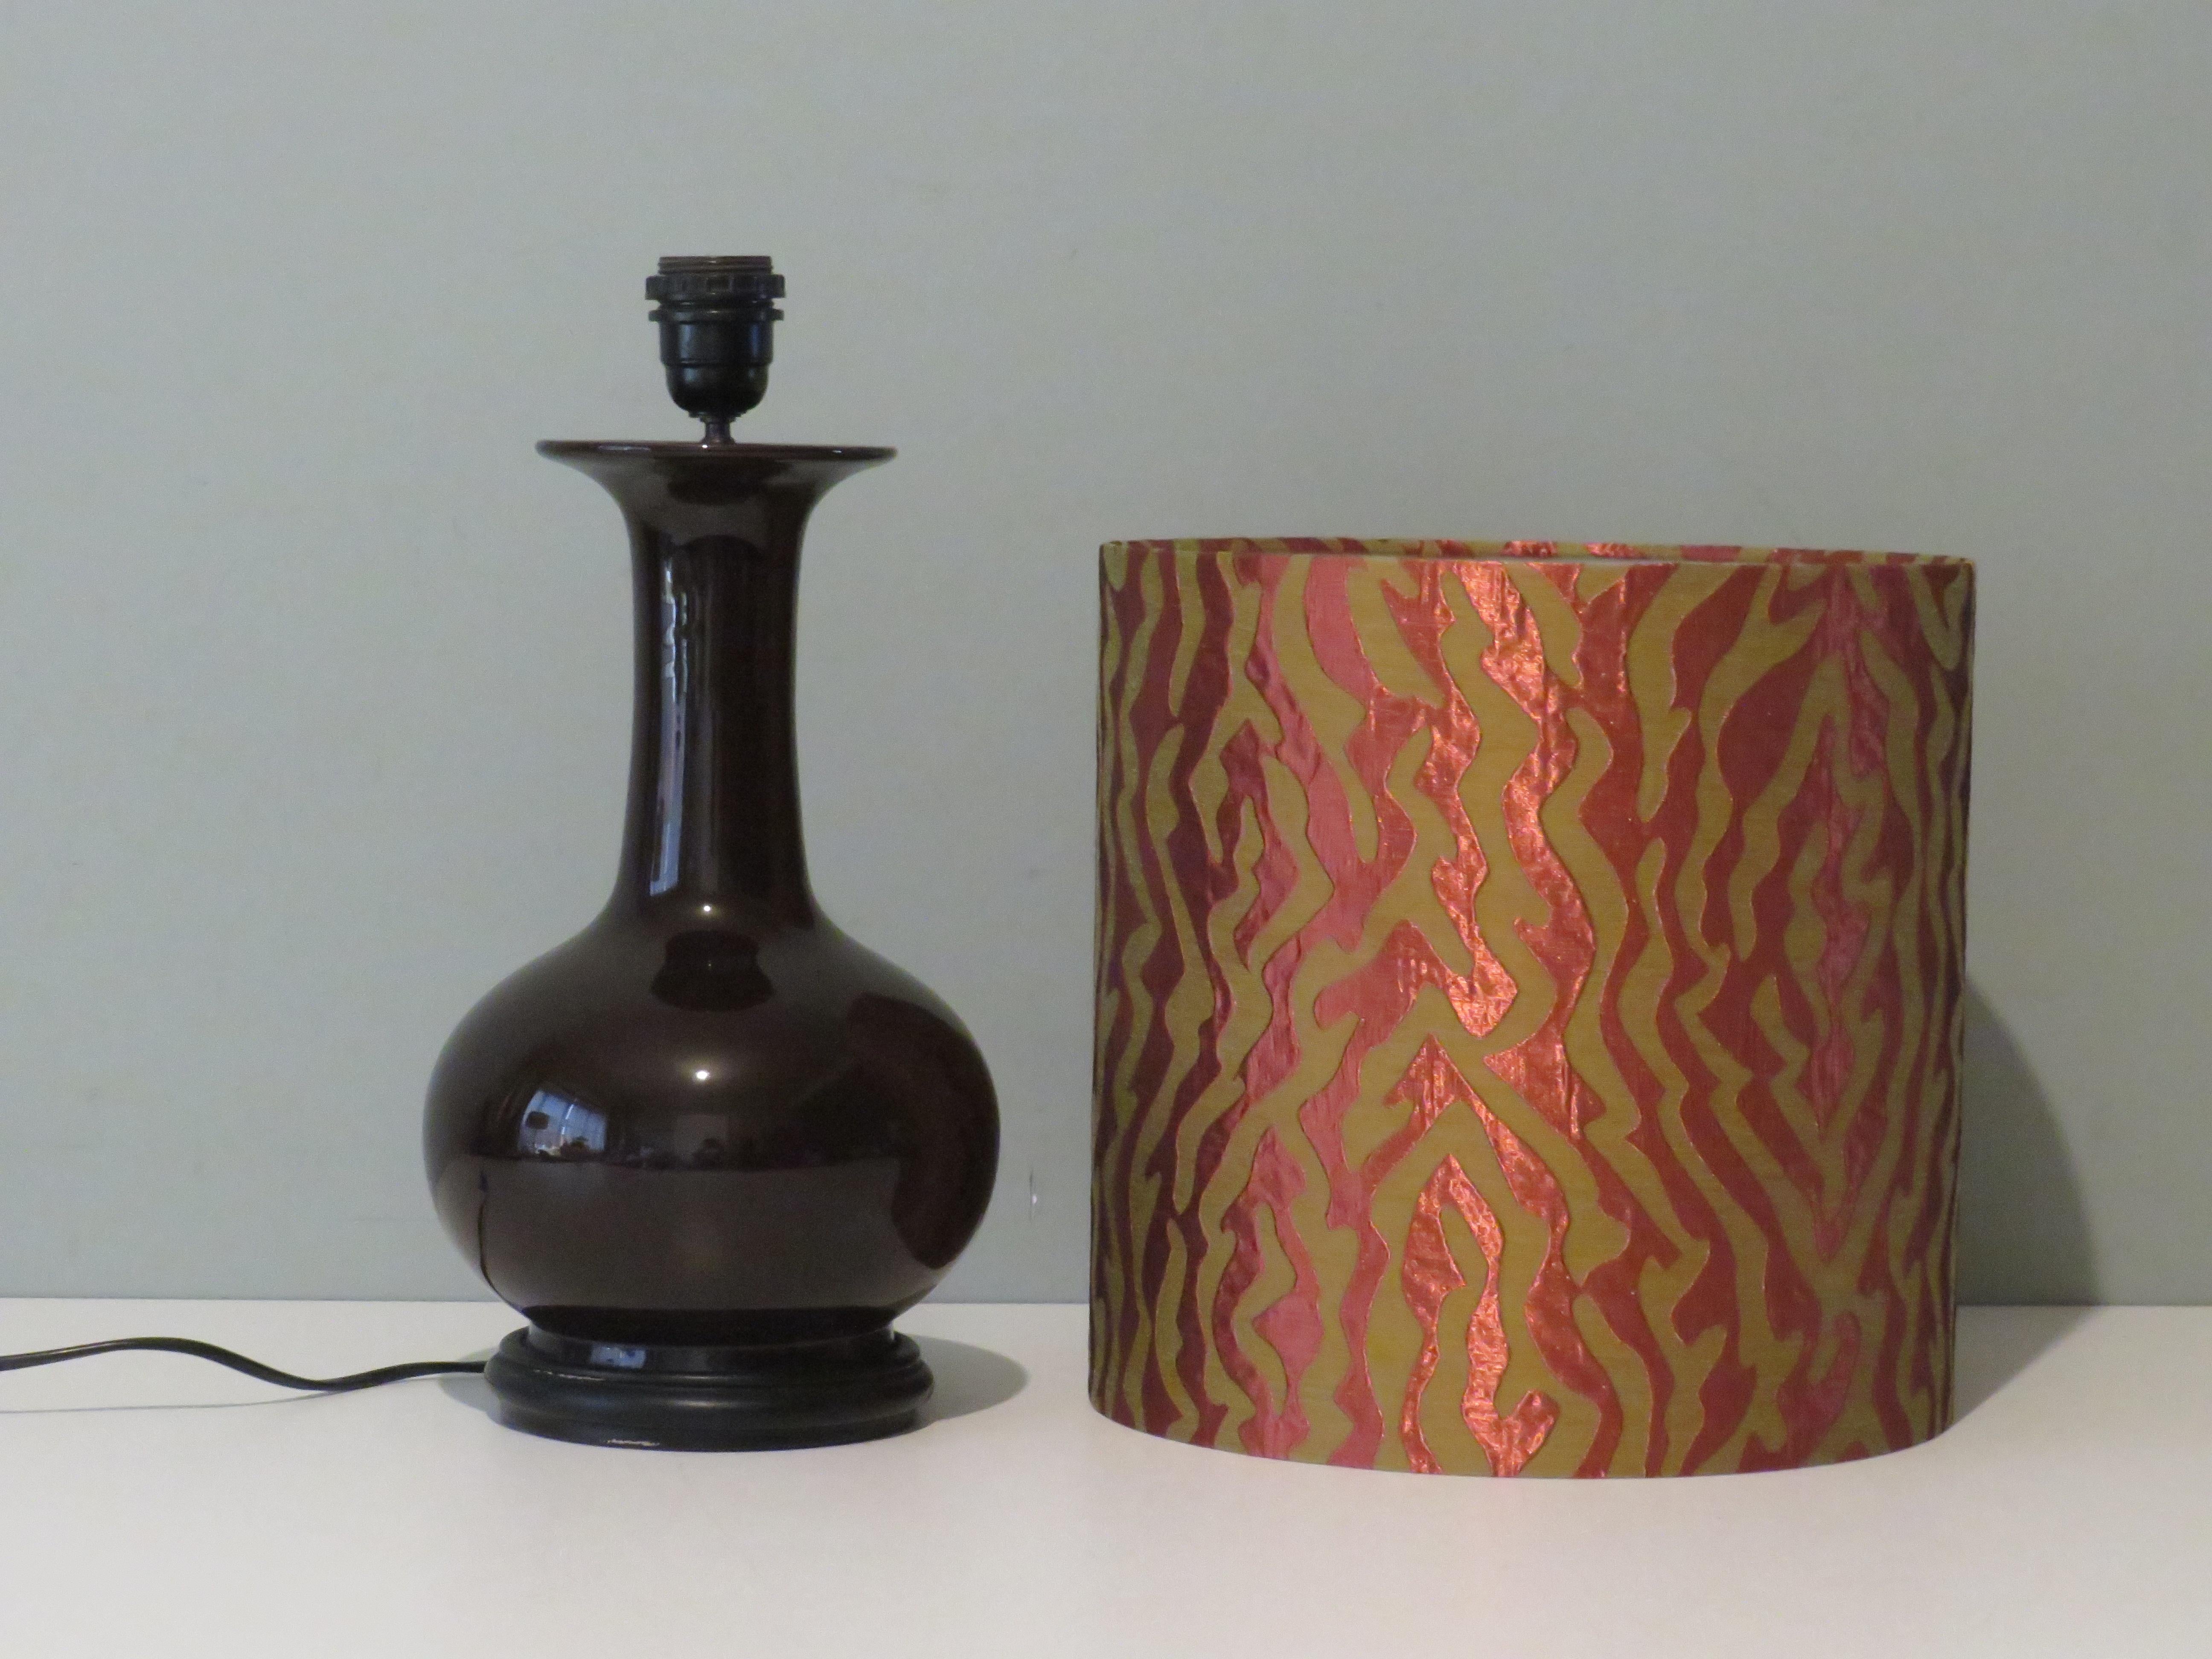 The very dark brown, almost black, glossy ceramic lamp base is equipped with a professionally handmade lampshade in relief fabric. The black foot is made of wood.
The table lamp is equipped with 1 E 27 fitting and is in very good condition.
The